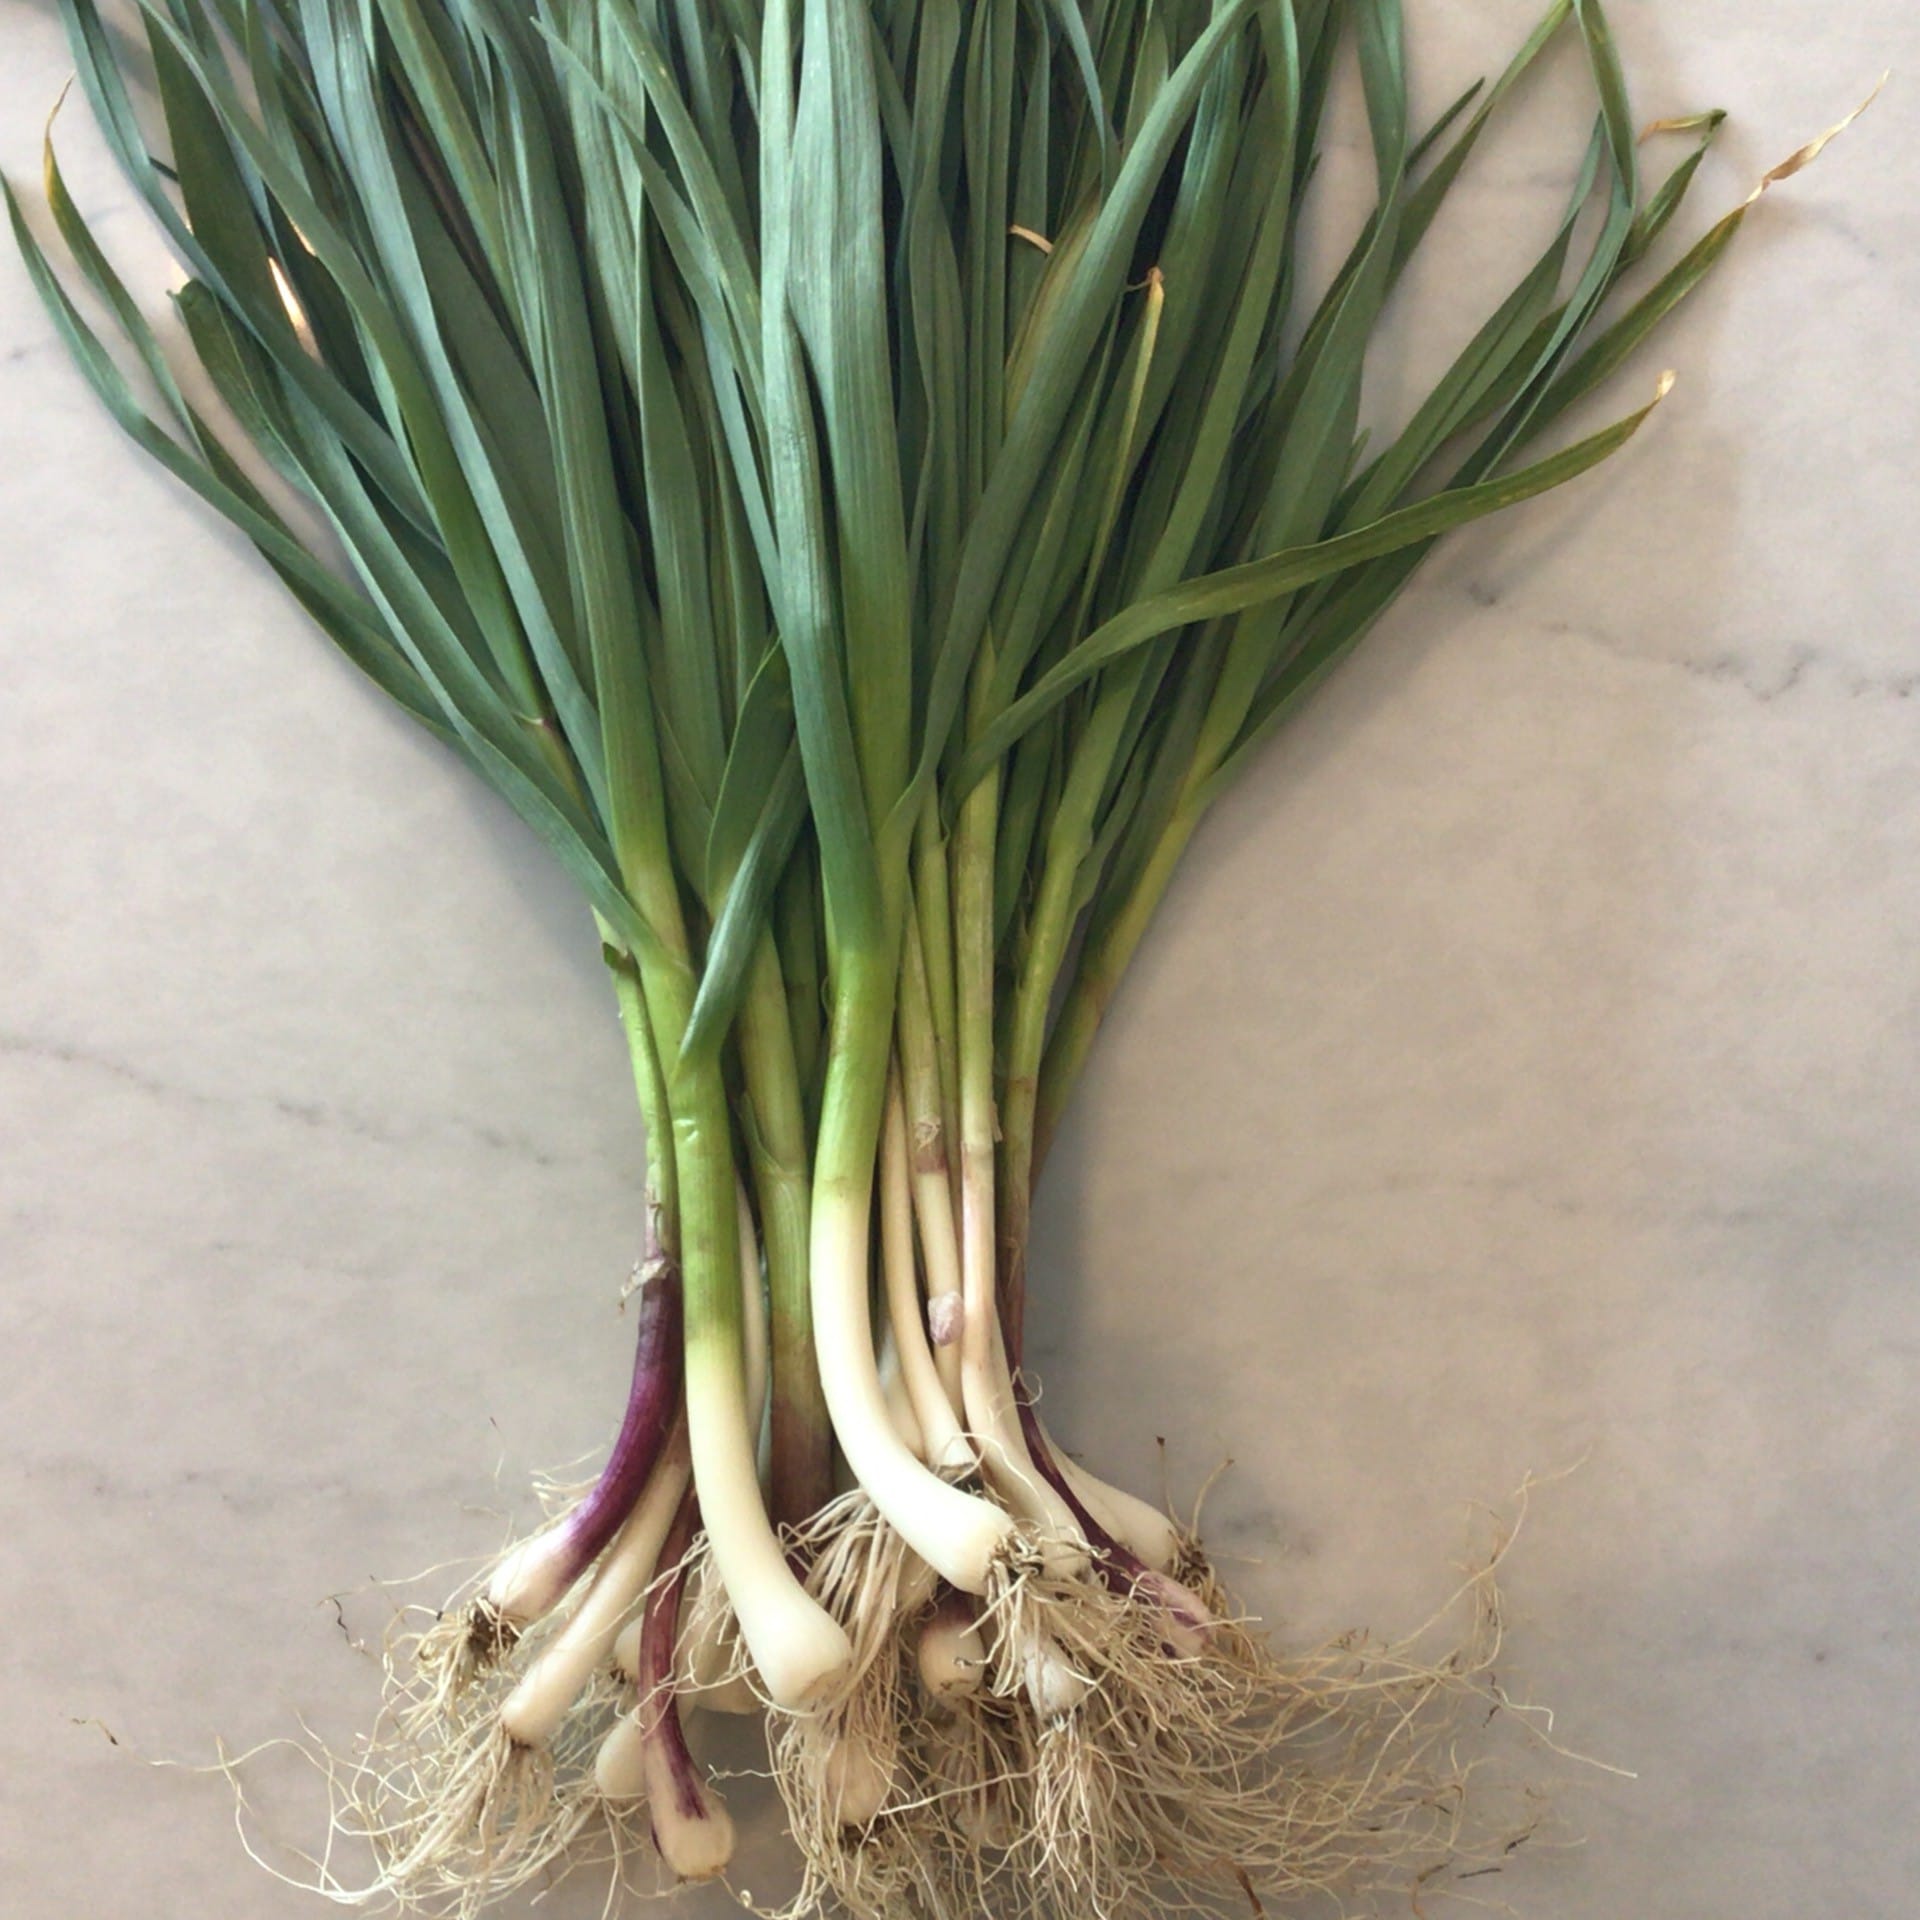 sold out green garlic